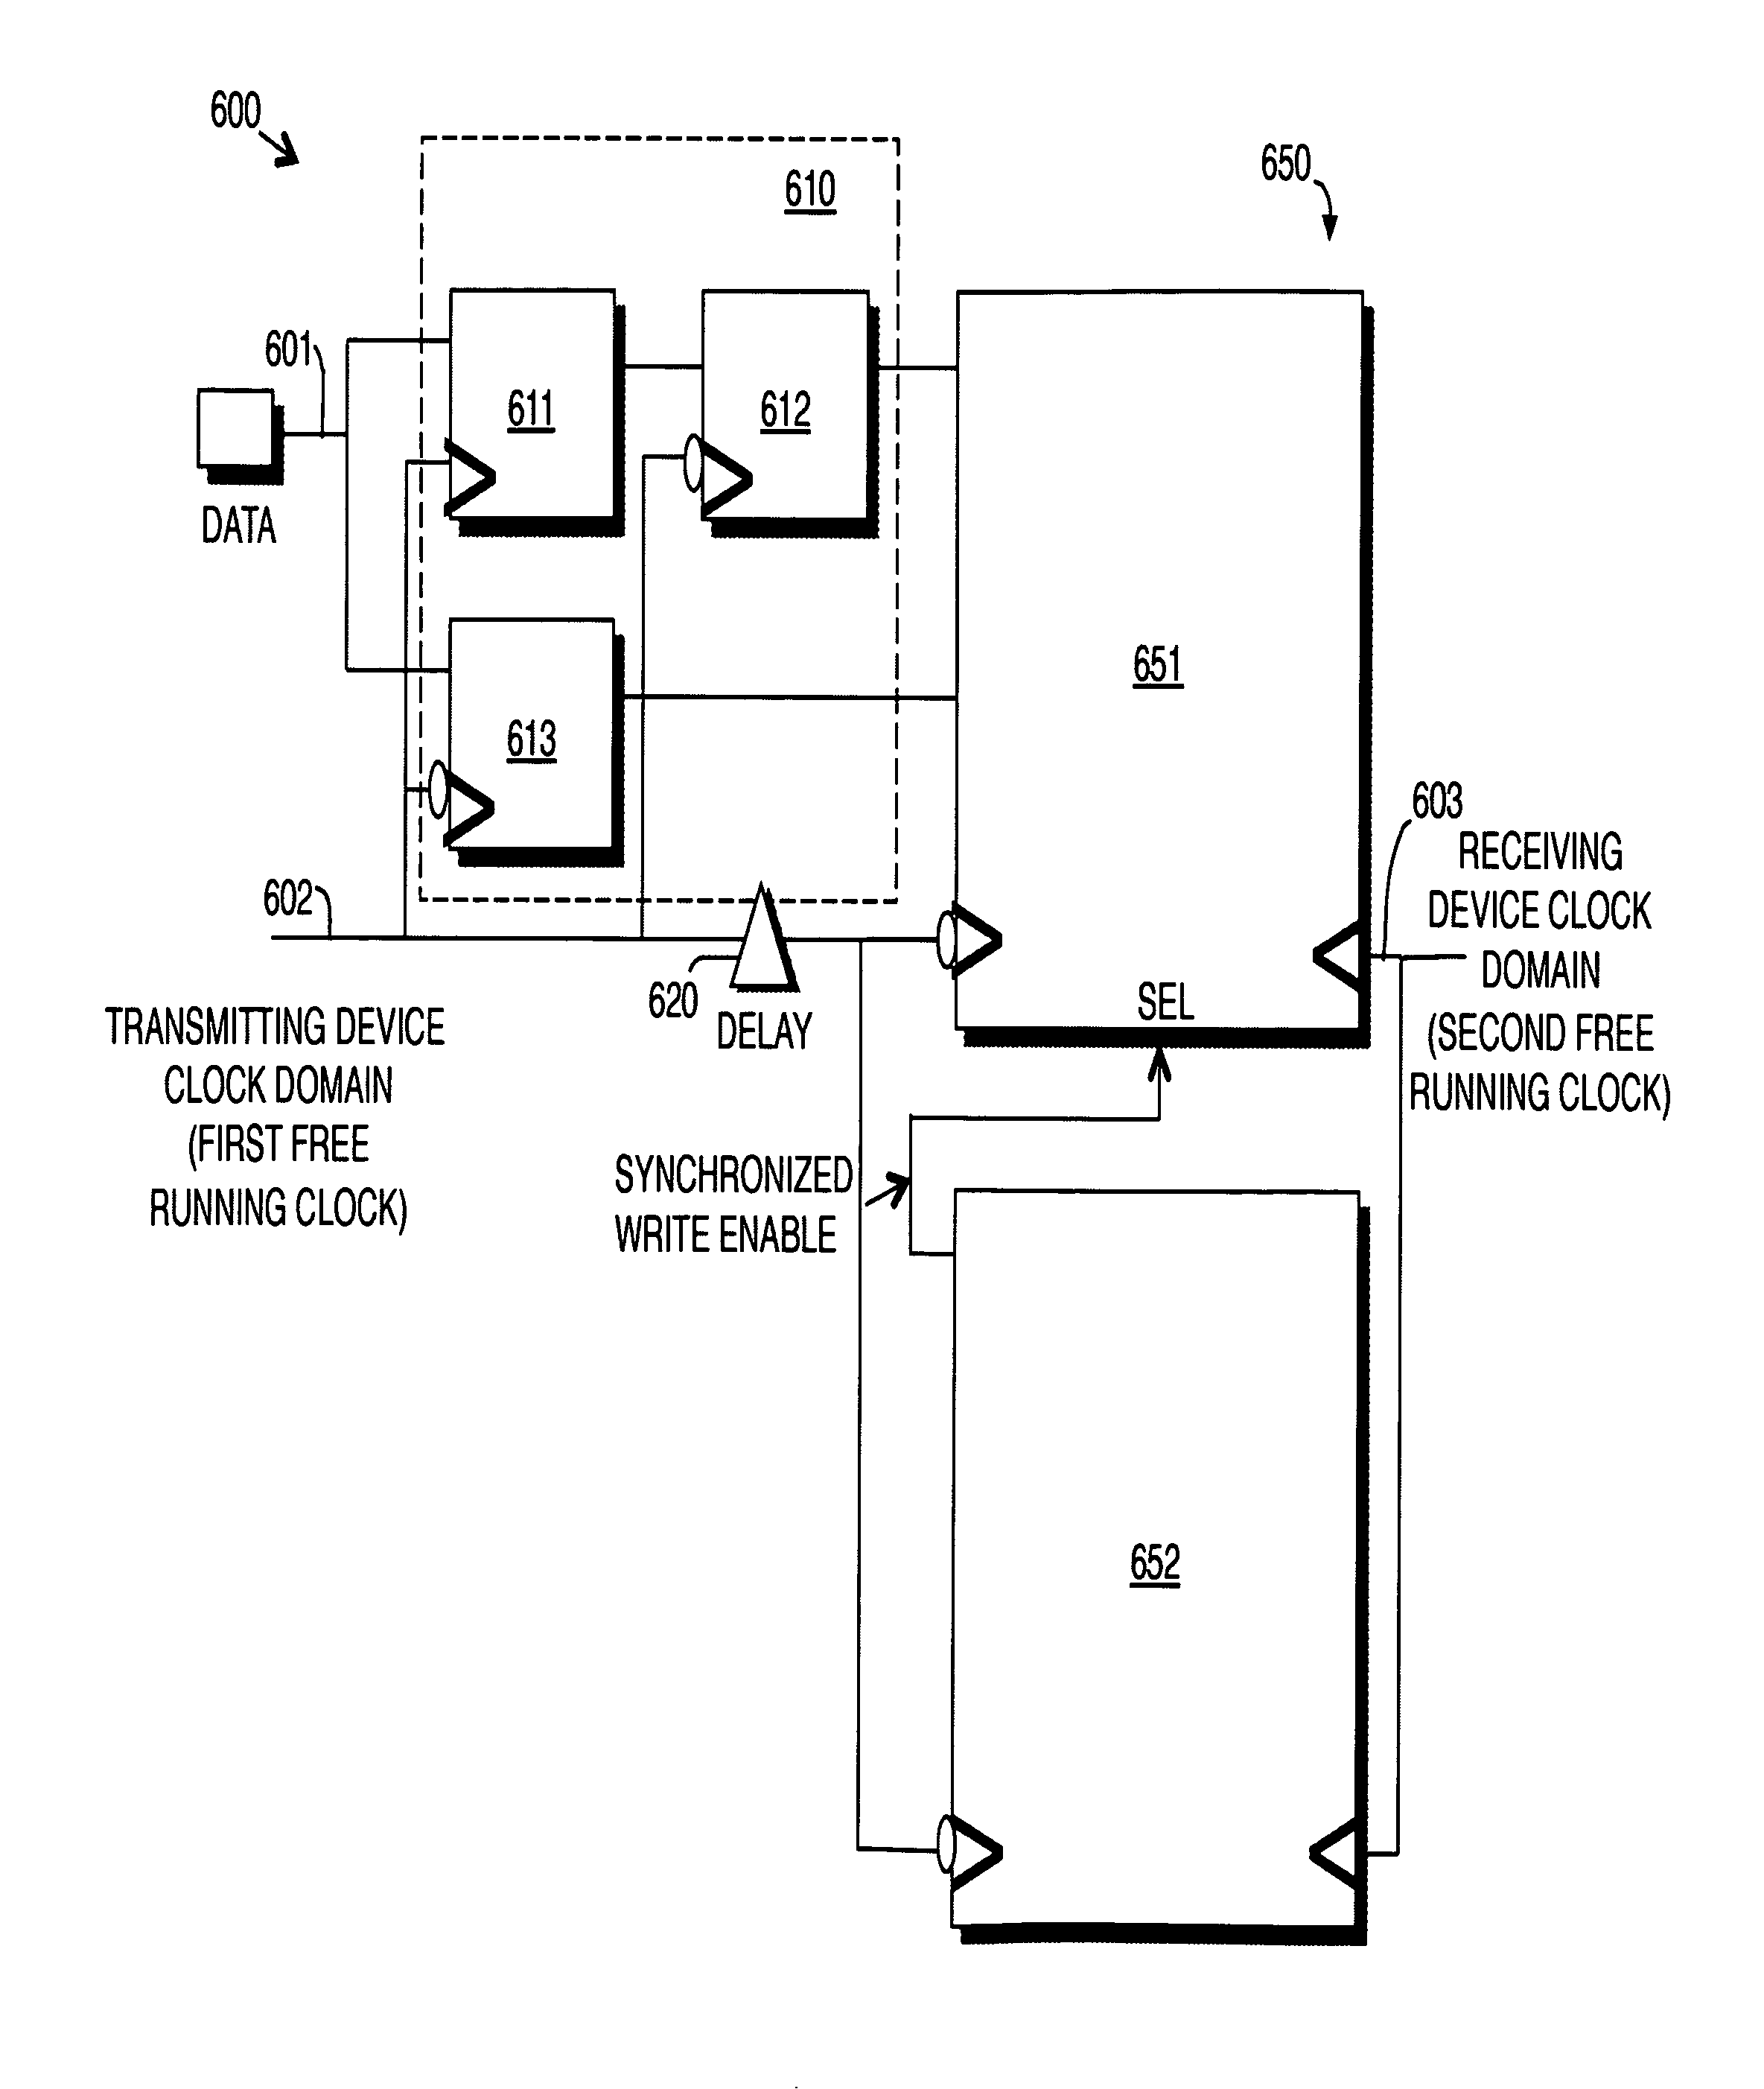 Method and apparatus for source-synchronous capture using a first-in-first-out unit